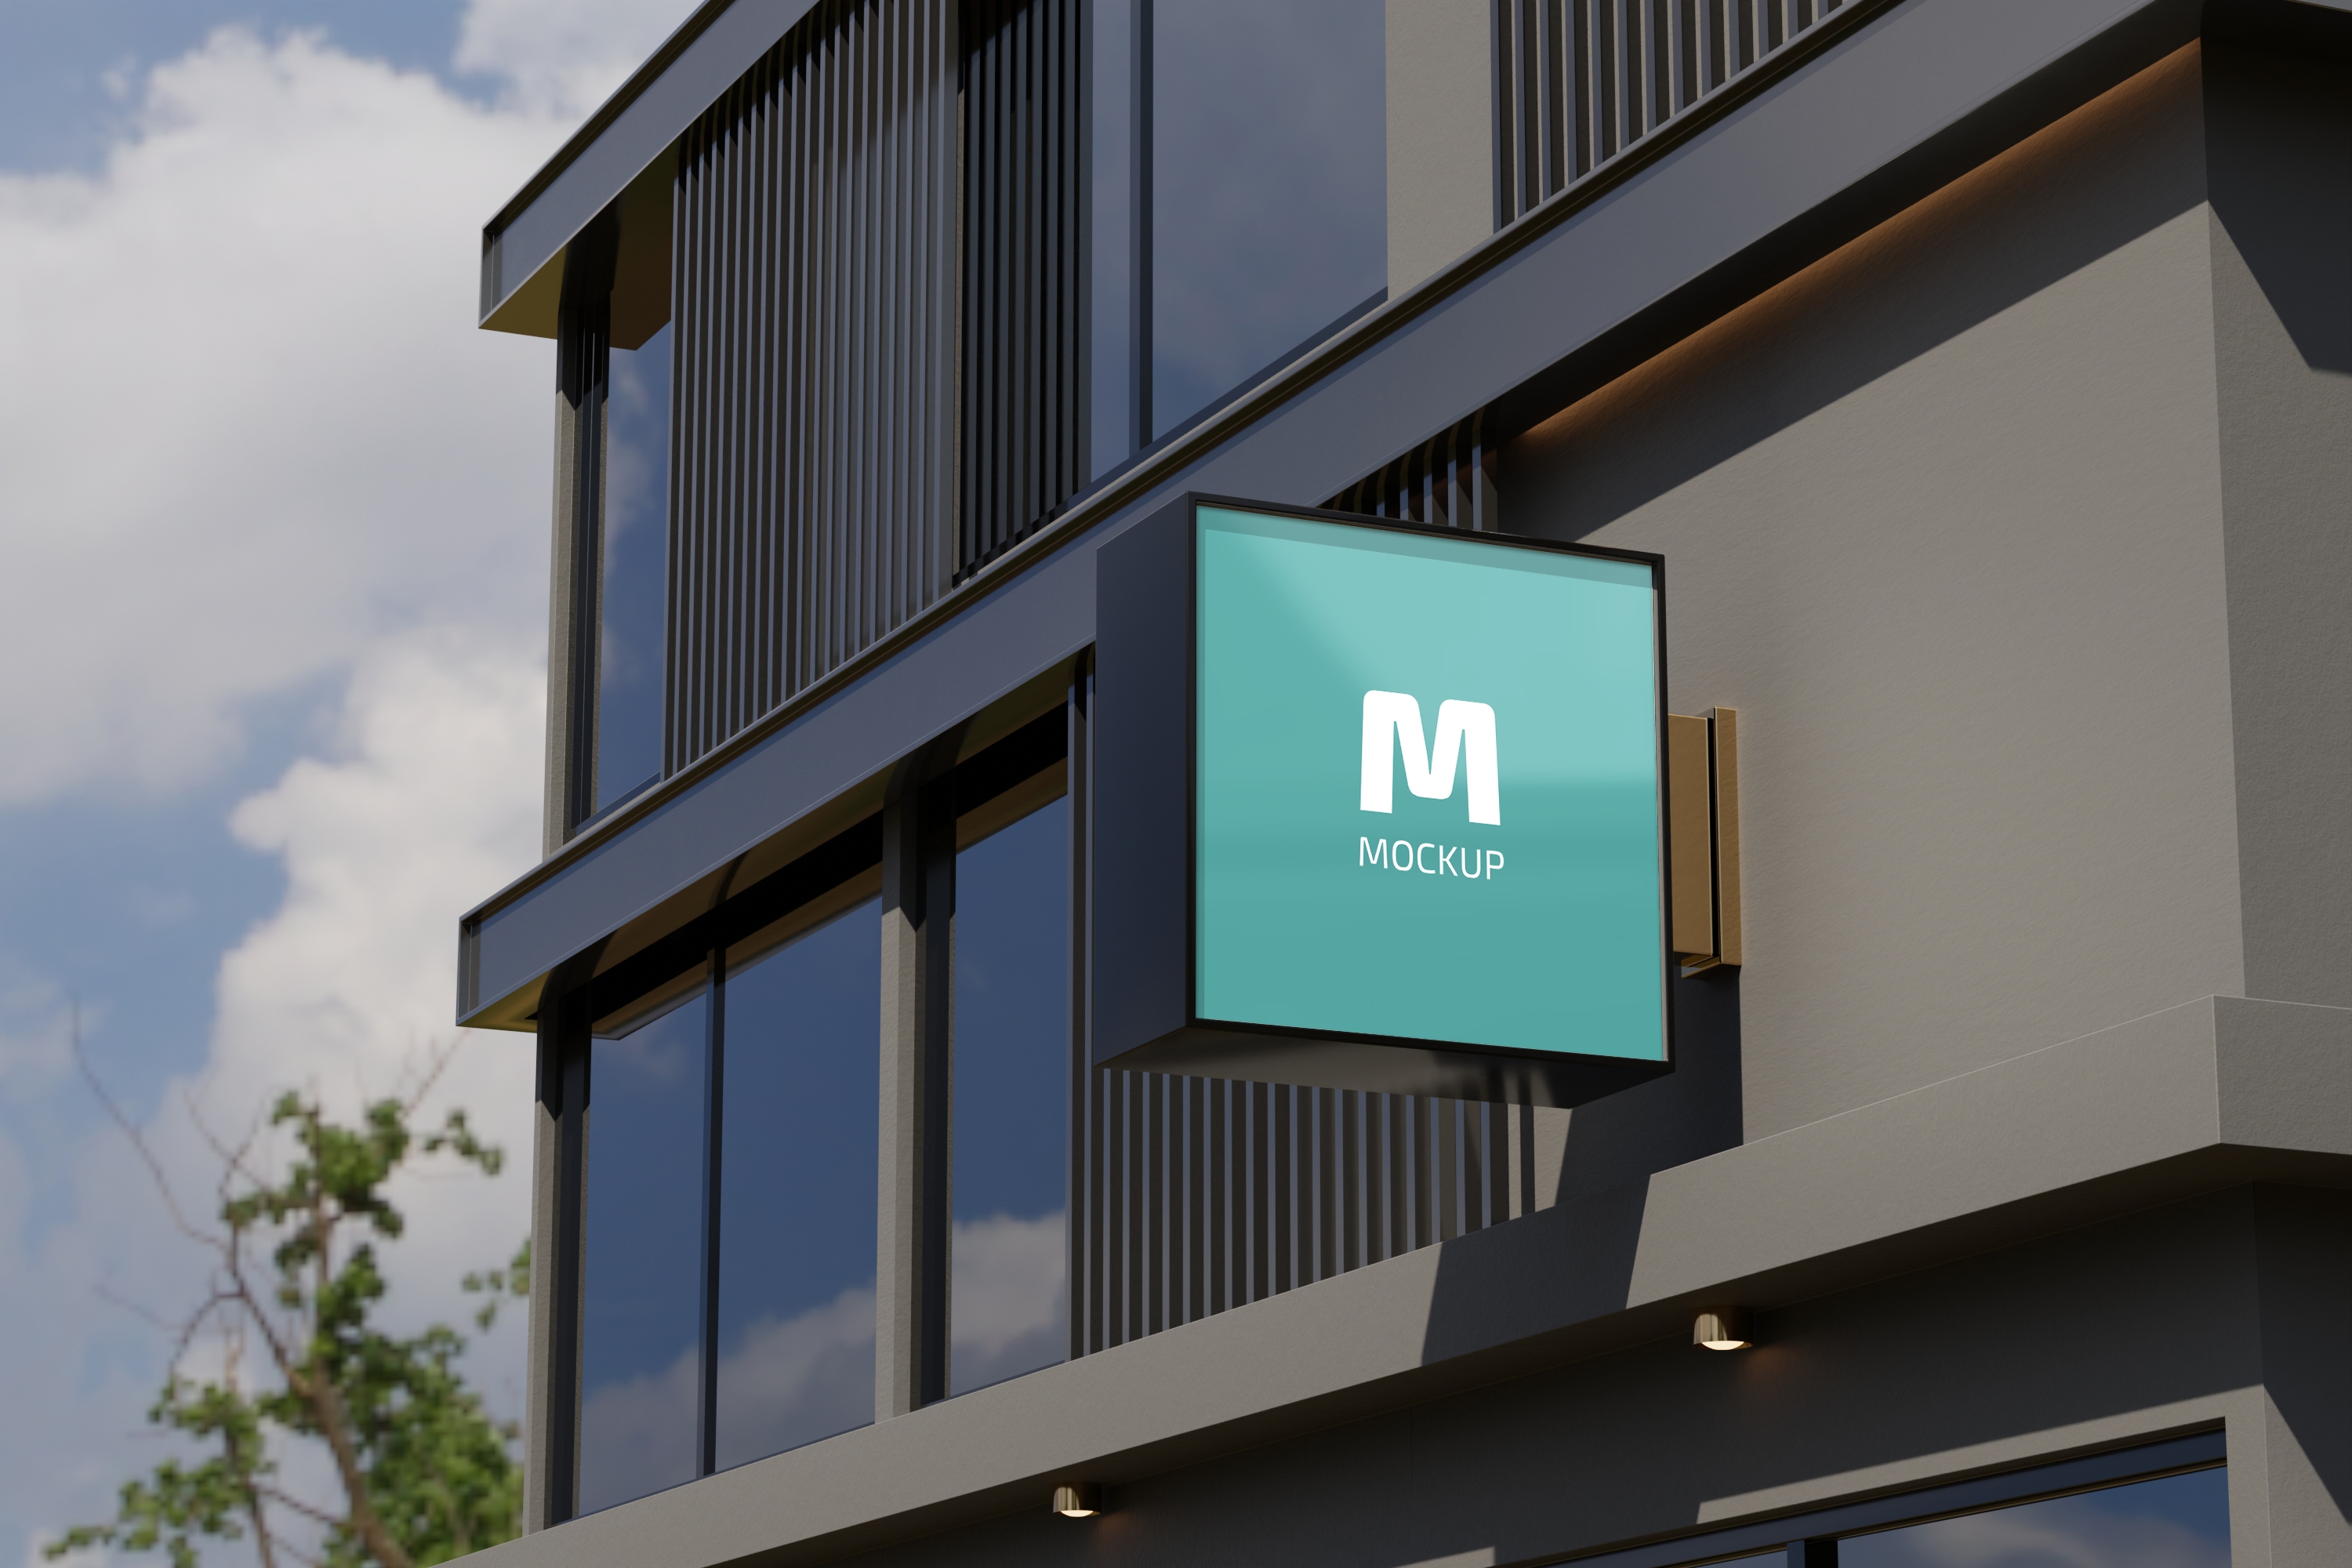 Logo sign mockup rectangle signage box on facade of office store building